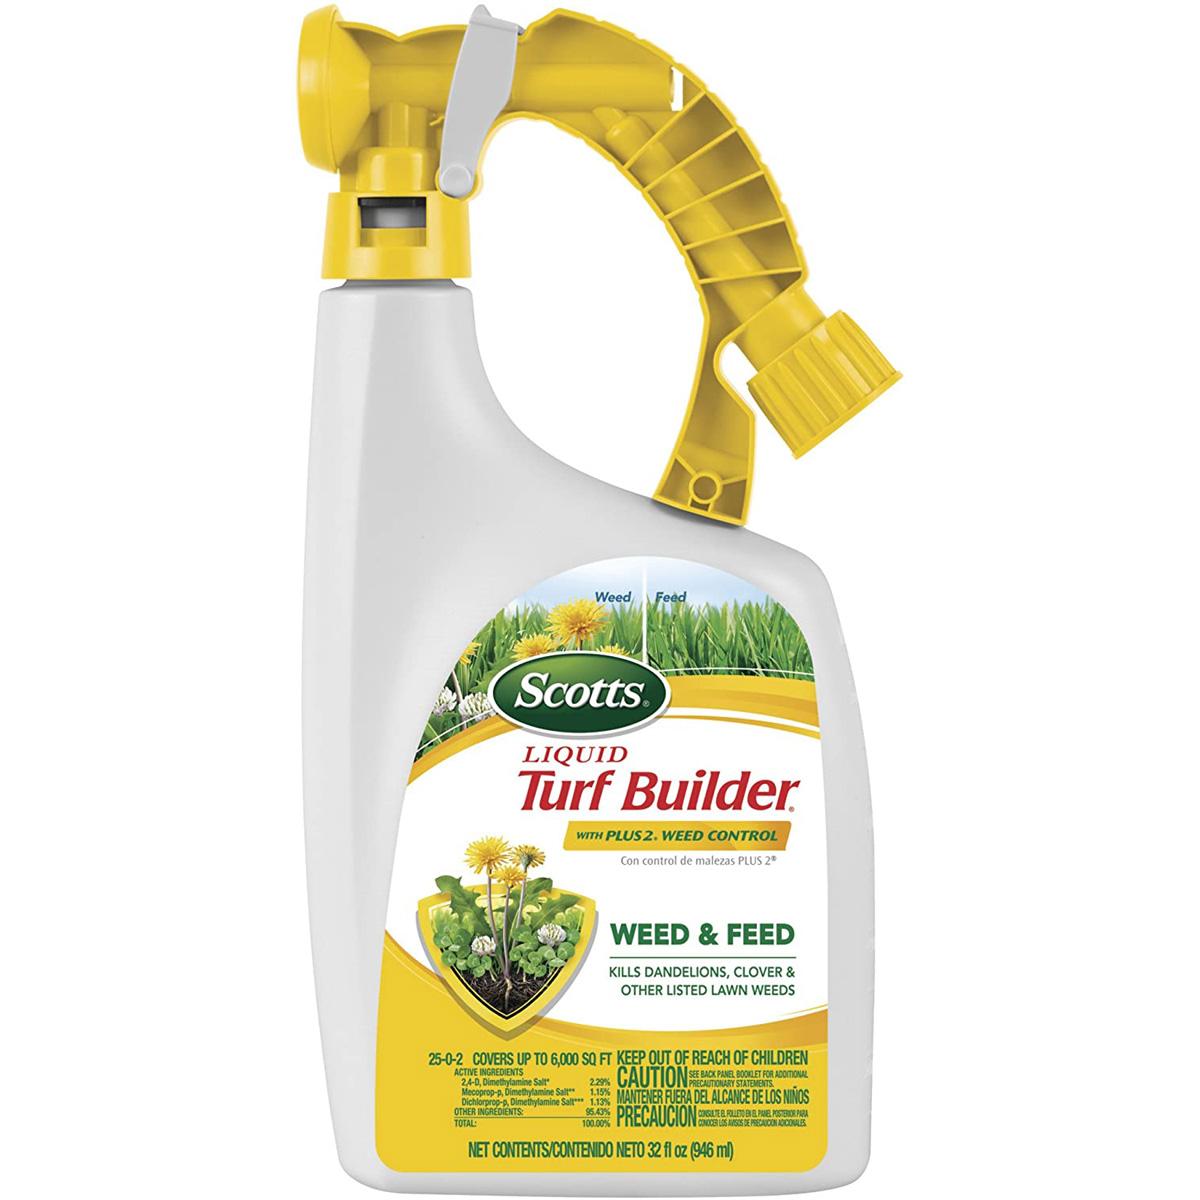 Scotts Liquid Turf Builder with Plus 2 Weed Control Fertilizer for $7.92